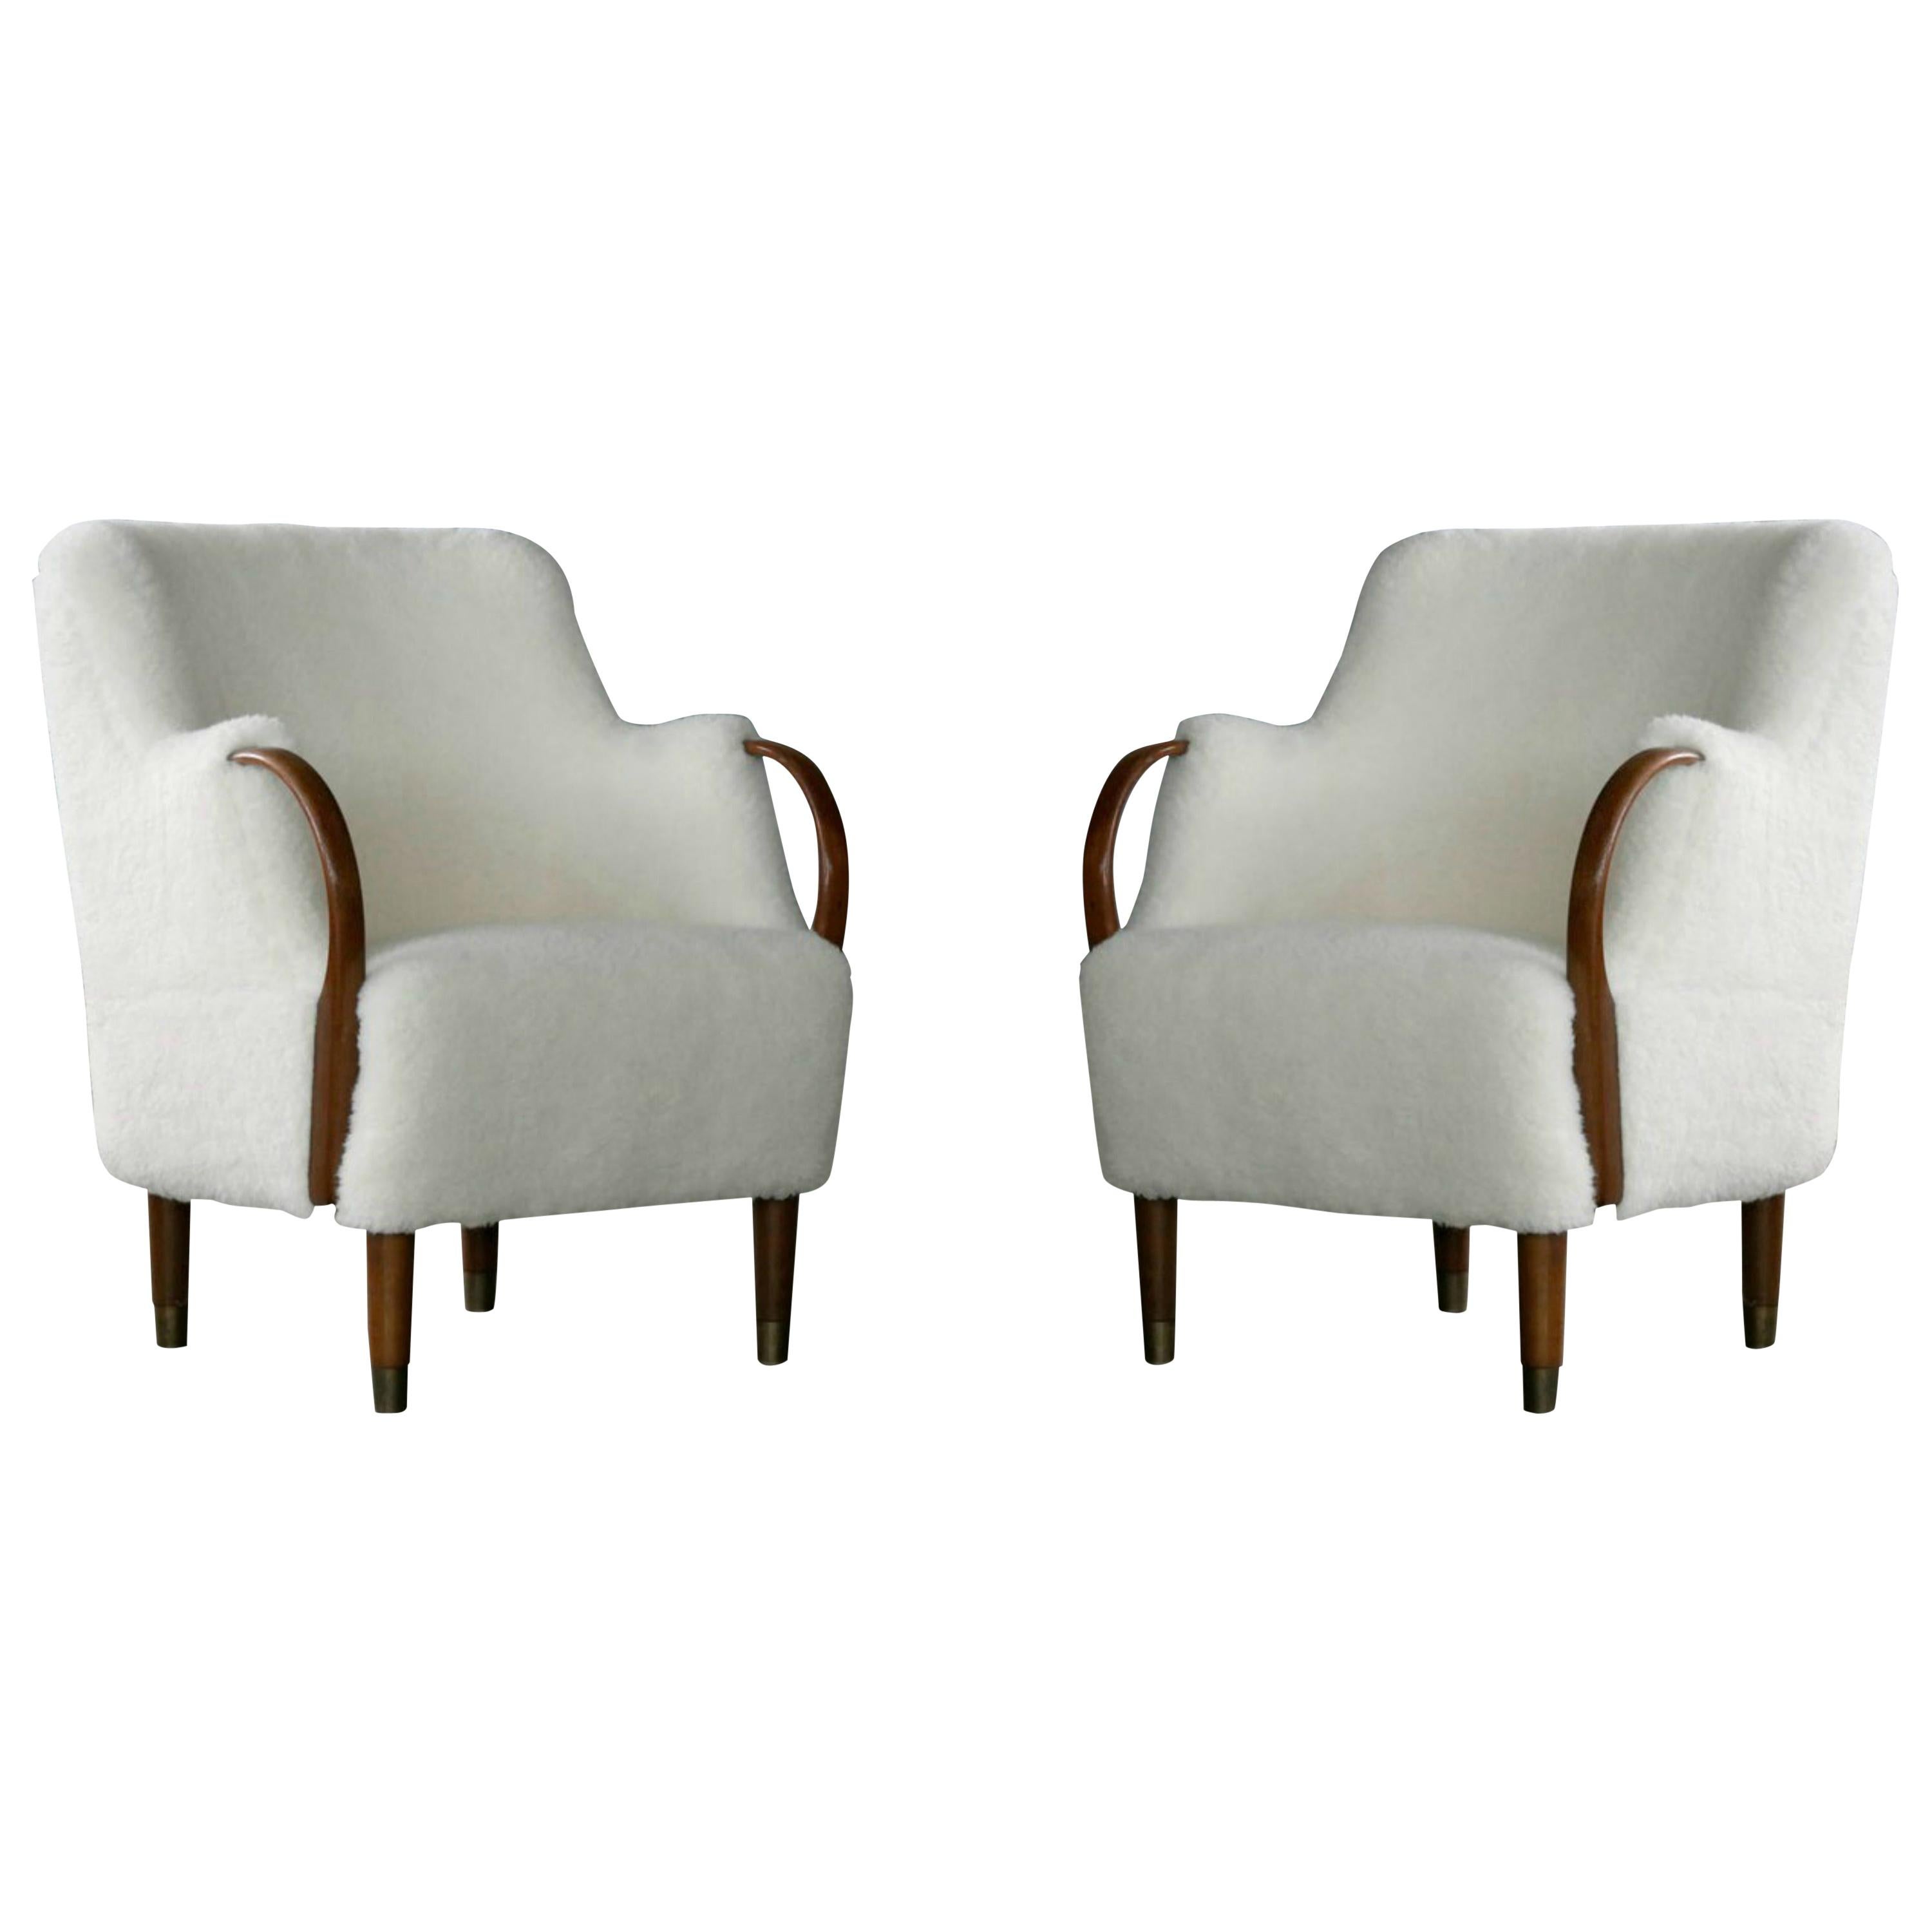 Pair of Danish Viggo Boesen Style Curved Lounge Chairs in Lambswool